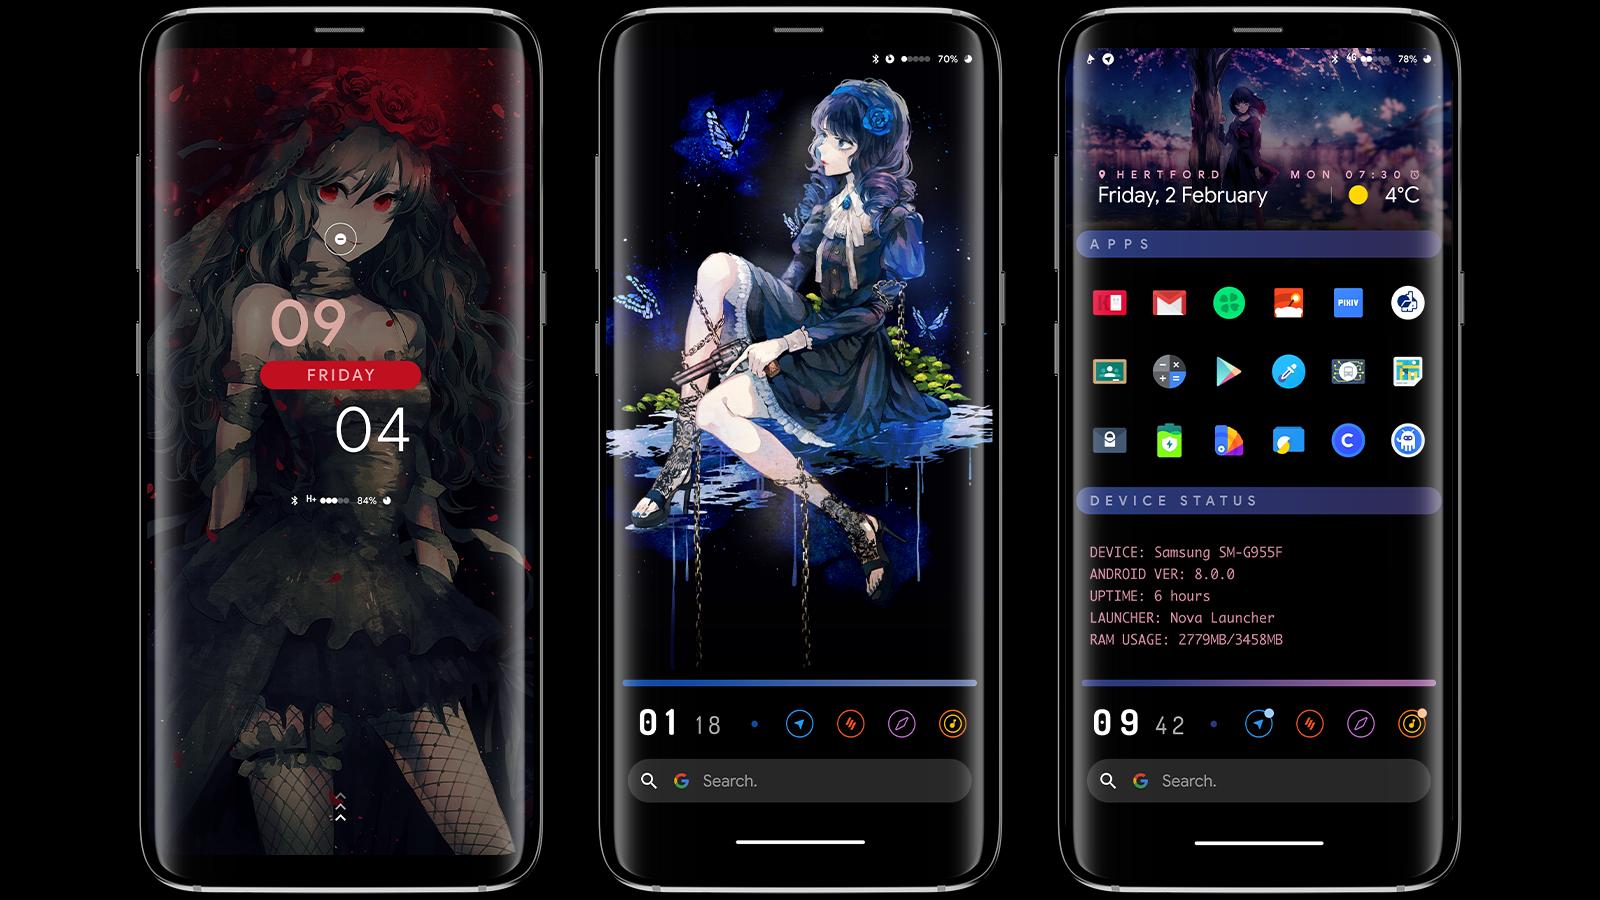 Android 用の Klwp Hana For Galaxy S8 Note 8 Apk をダウンロード